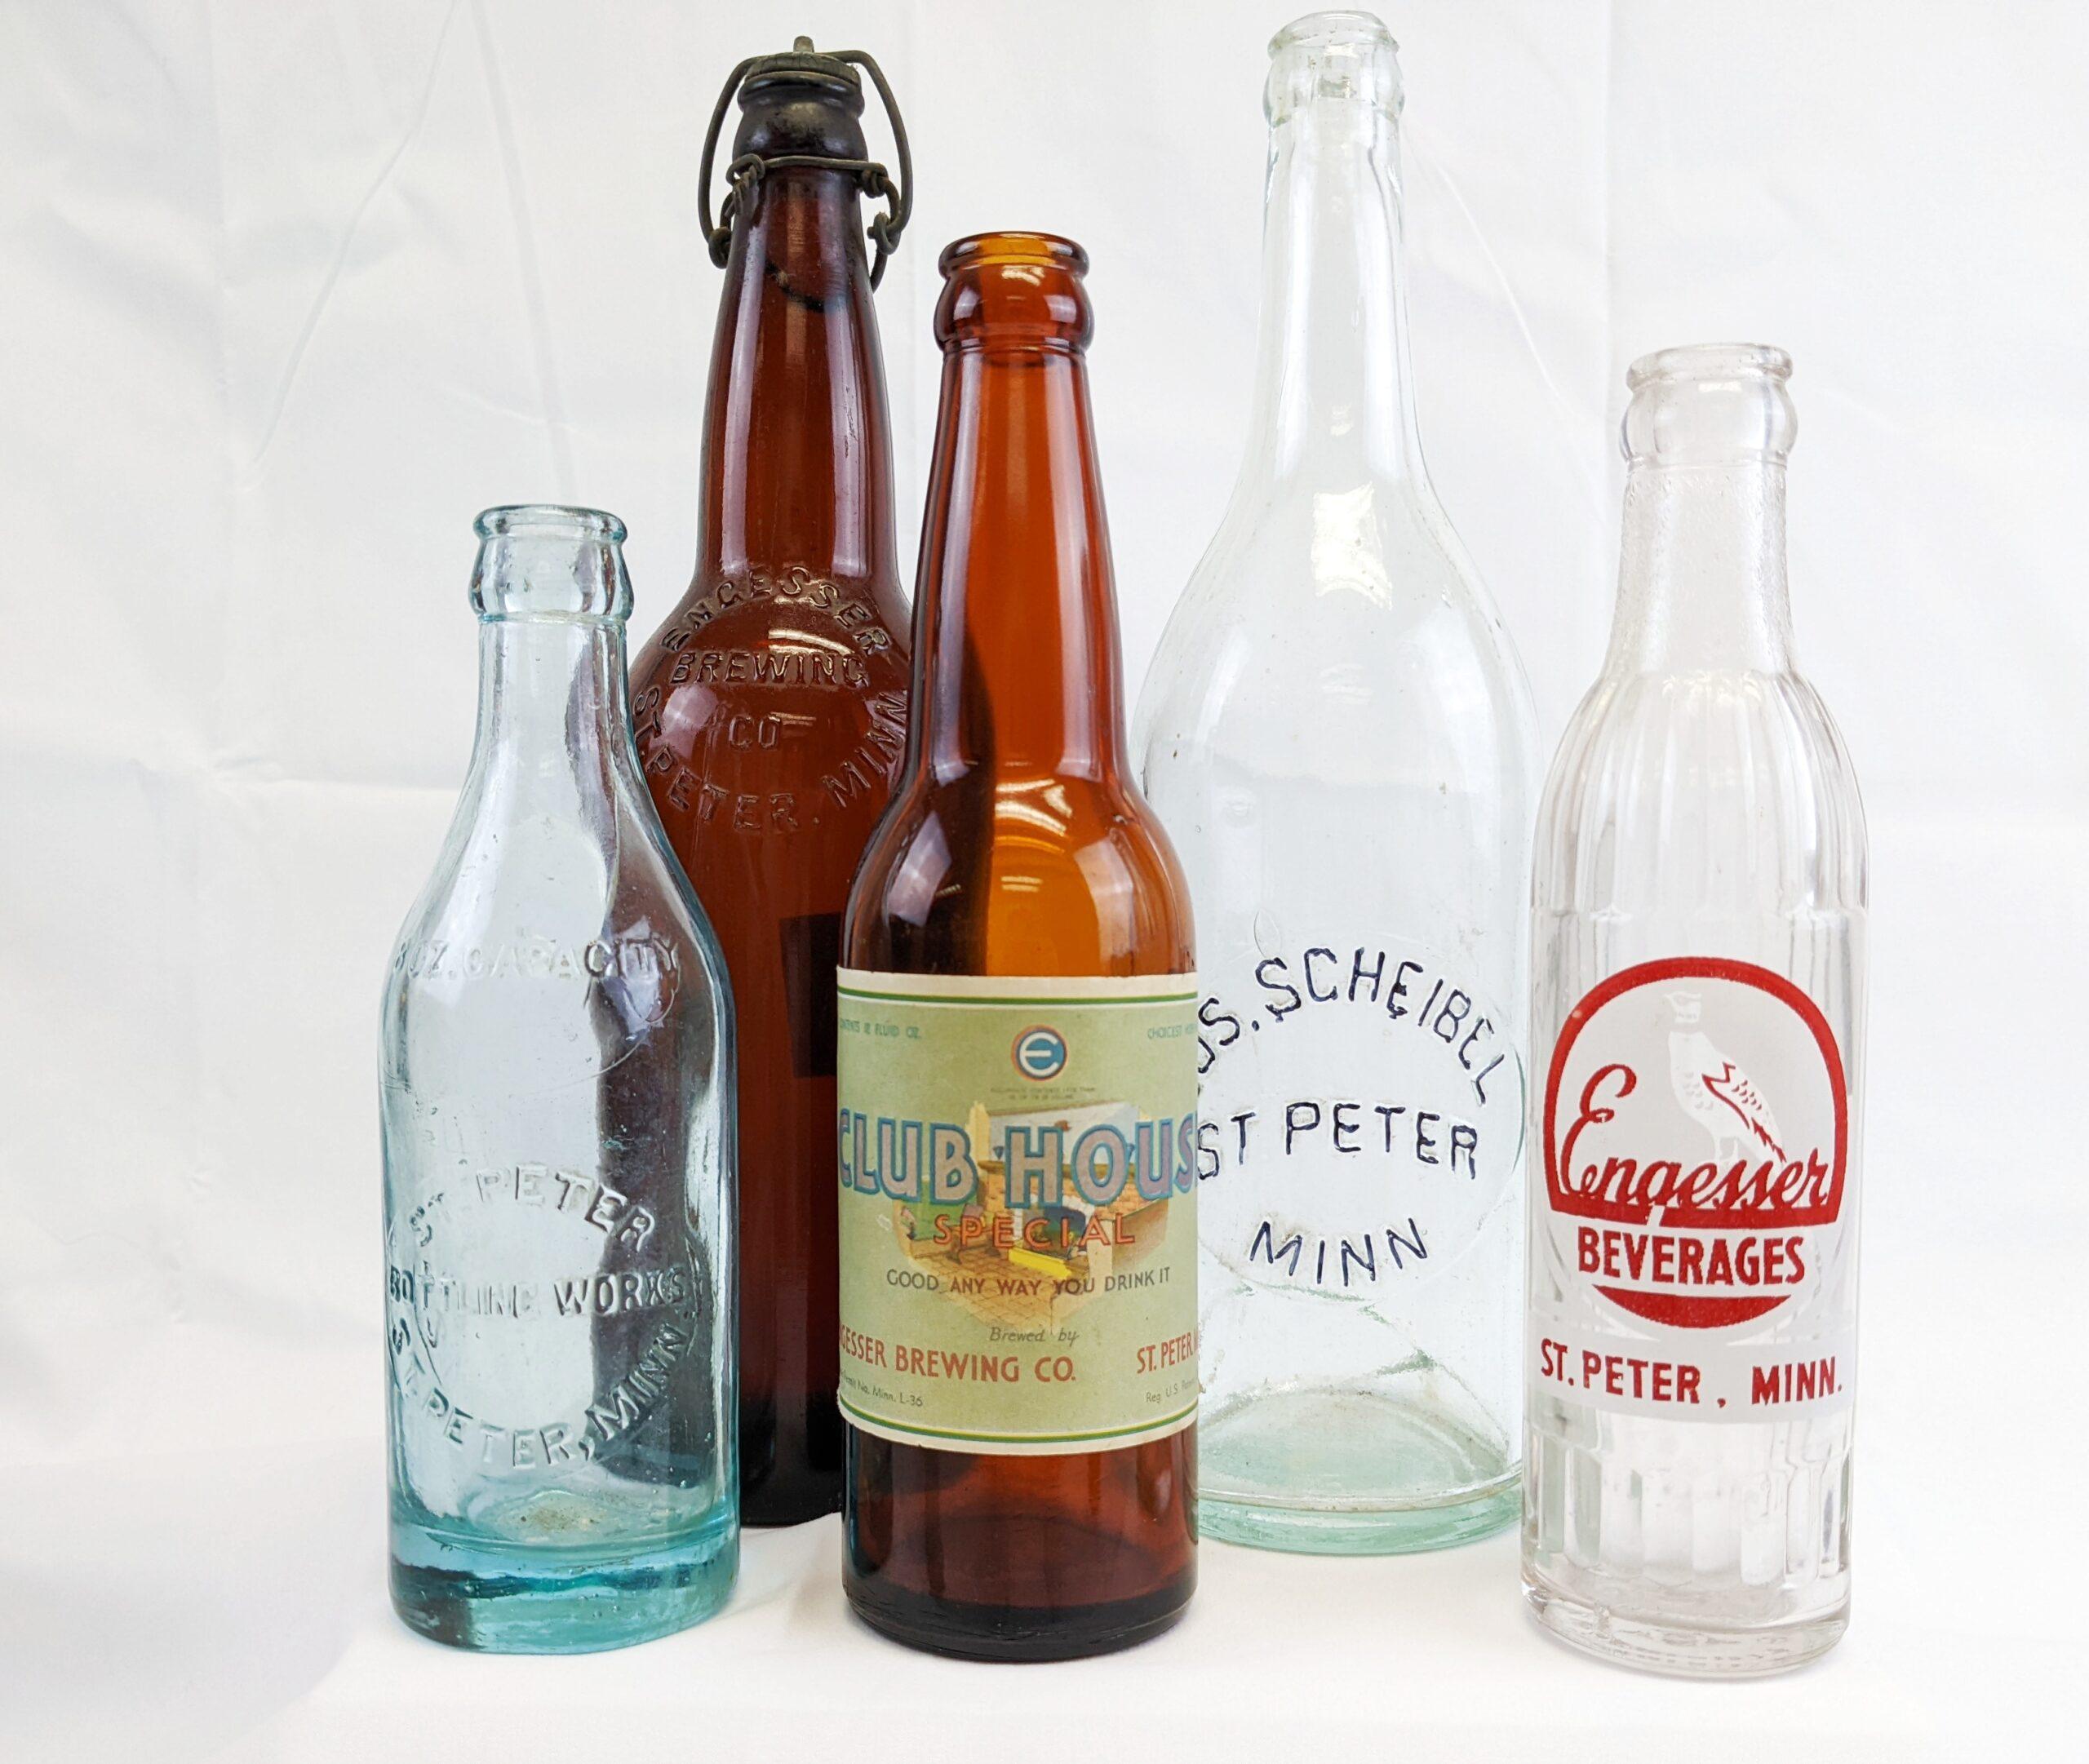 Various color and size glass bottles in front of a white background.